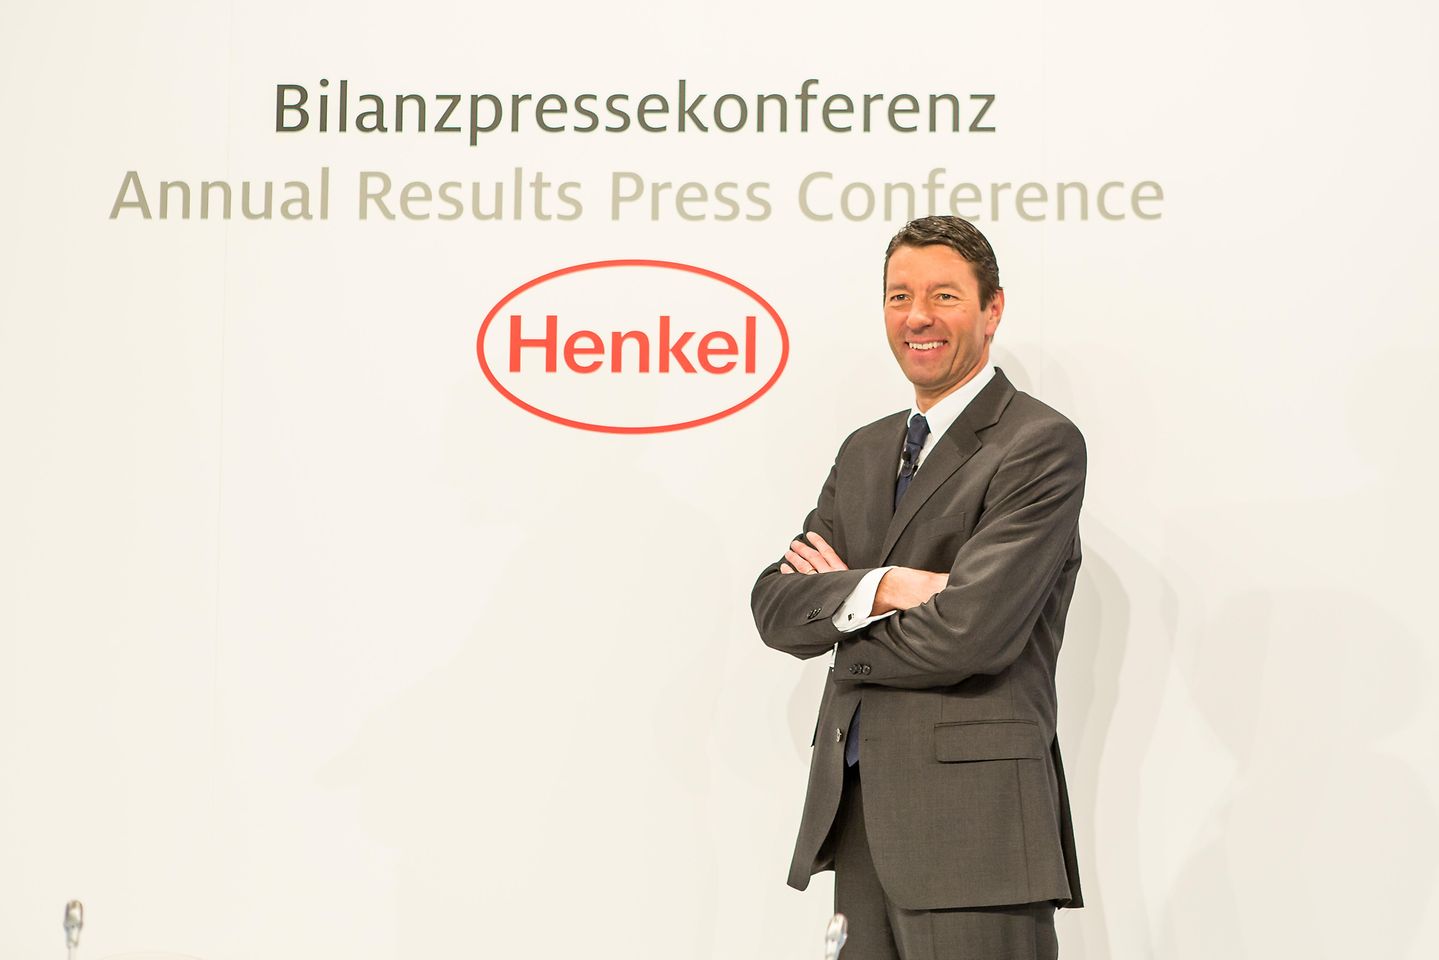 

March 6, 2013 | Annual Results Press Conference: Kasper Rorsted